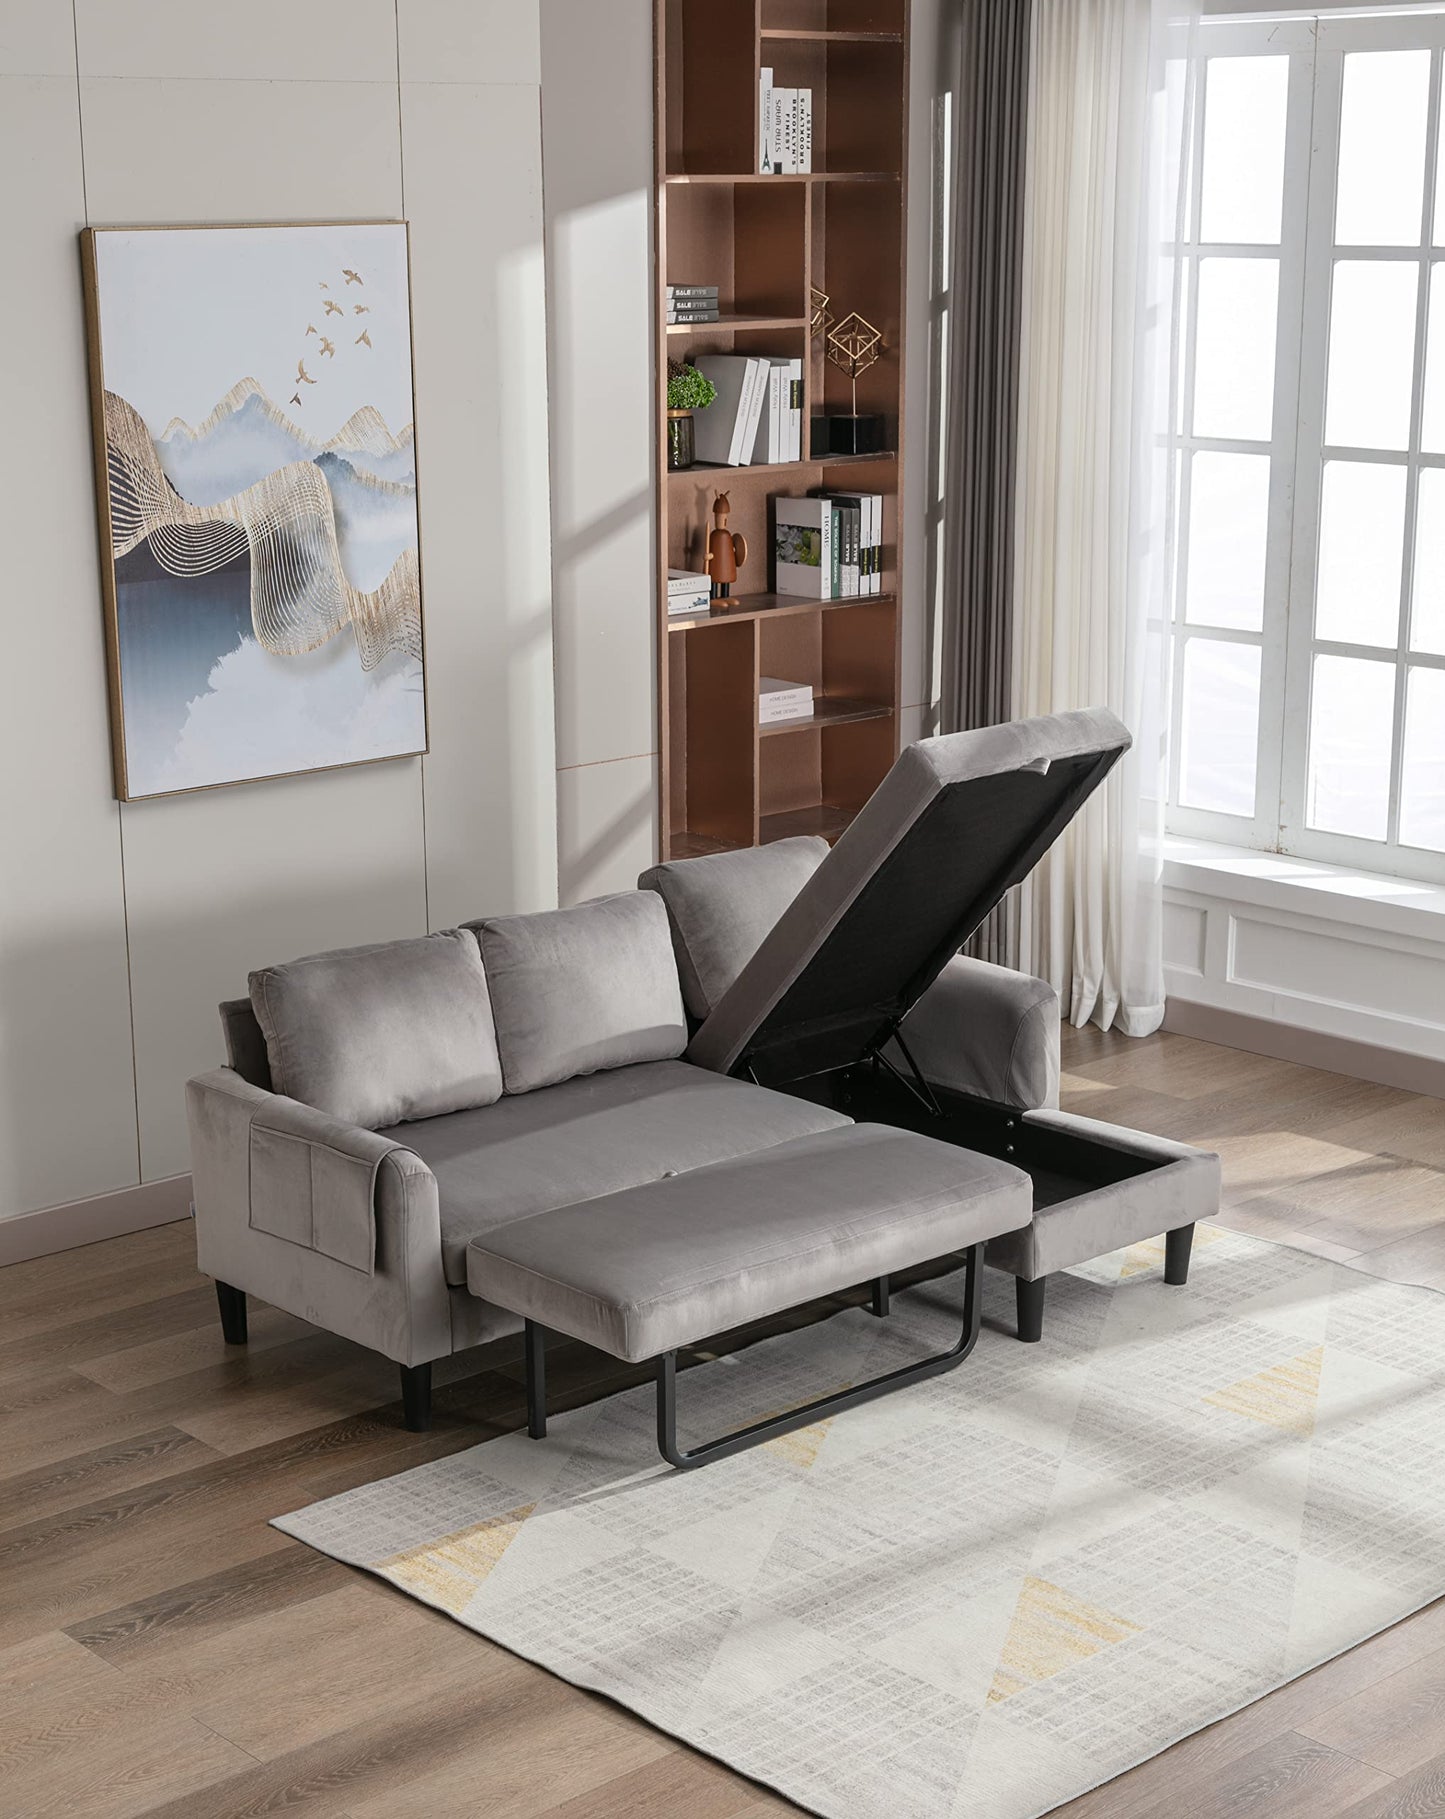 Zaprosze Combination Sofa Bed, Pull-Out Sofa, 3-Seater Sofa, Upholstered L-Shaped Reversible Combination Sleeper Sofa, Combination Sofa with Storage, Gray